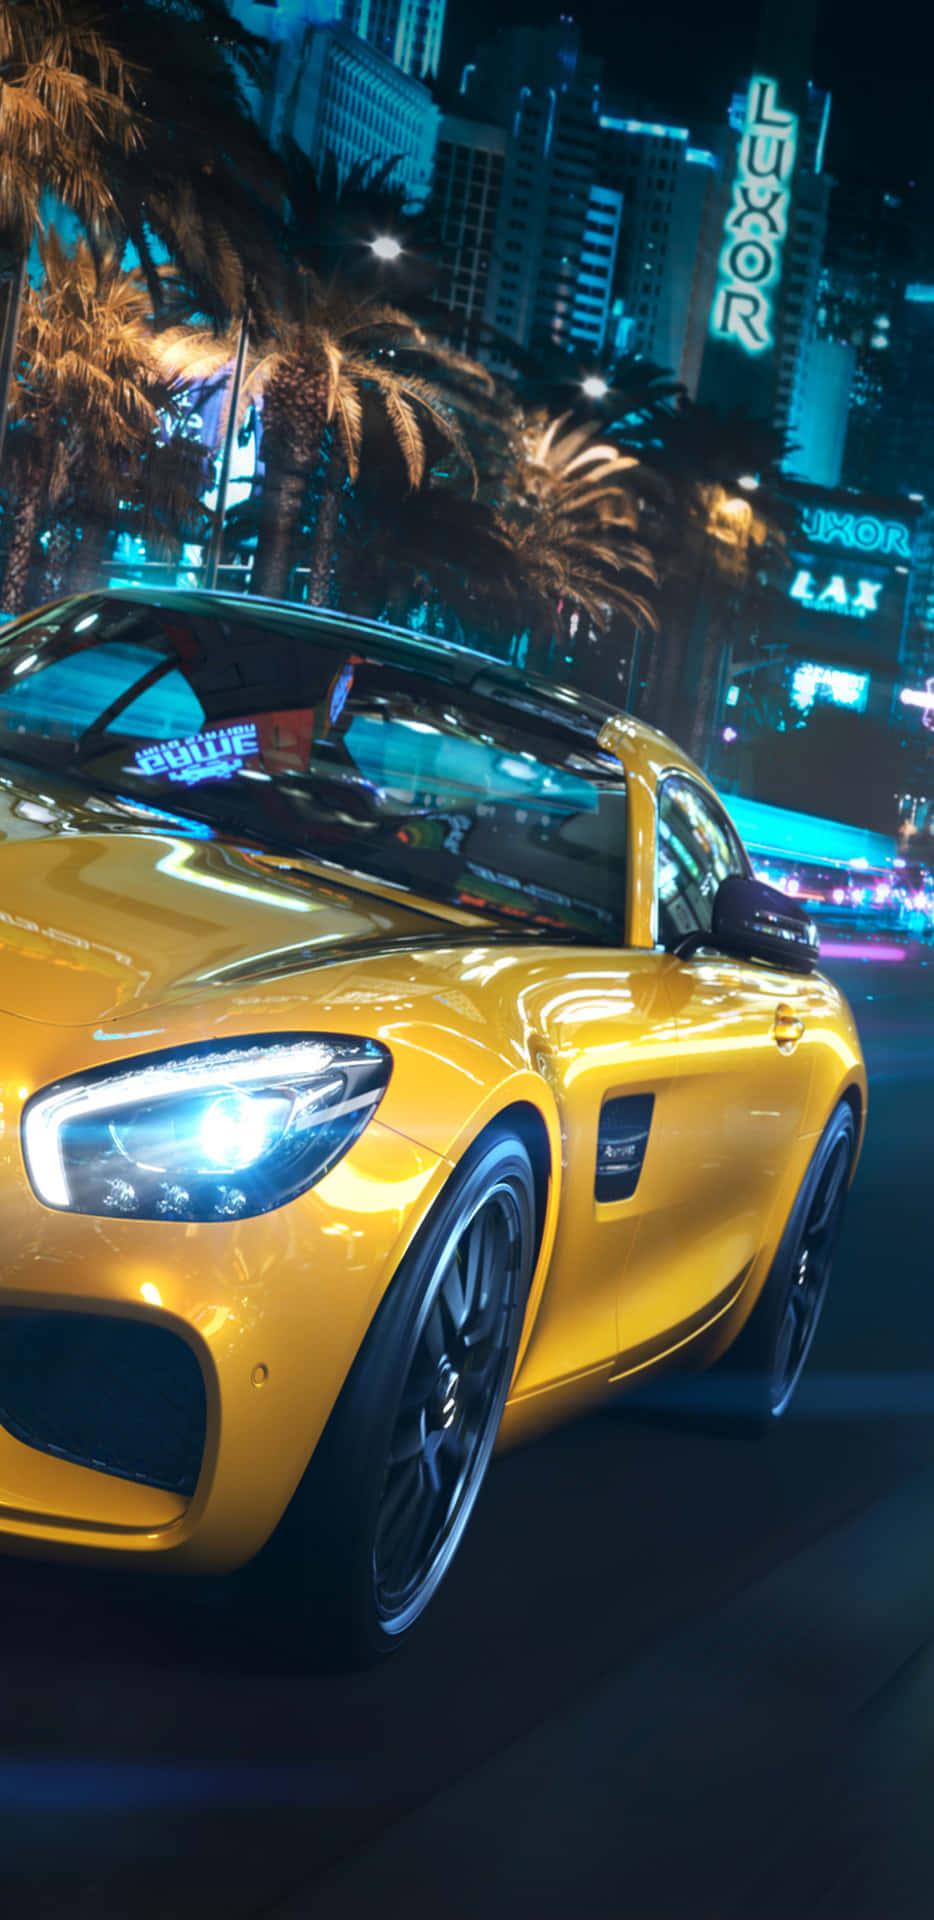 A Yellow Sports Car Driving Down The Street At Night